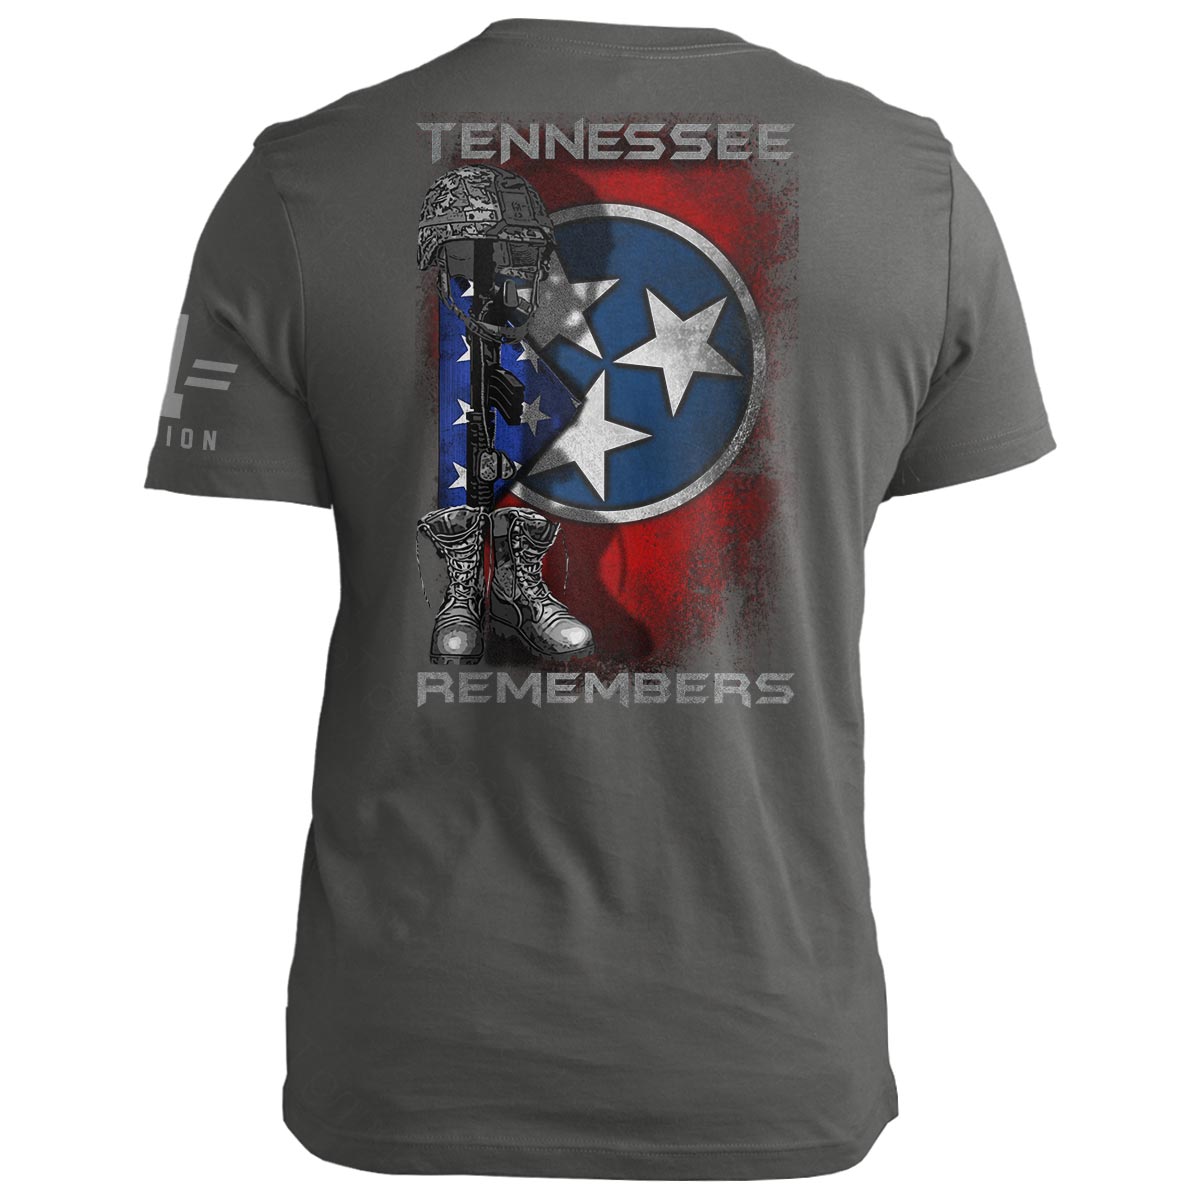 Tennessee Remembers